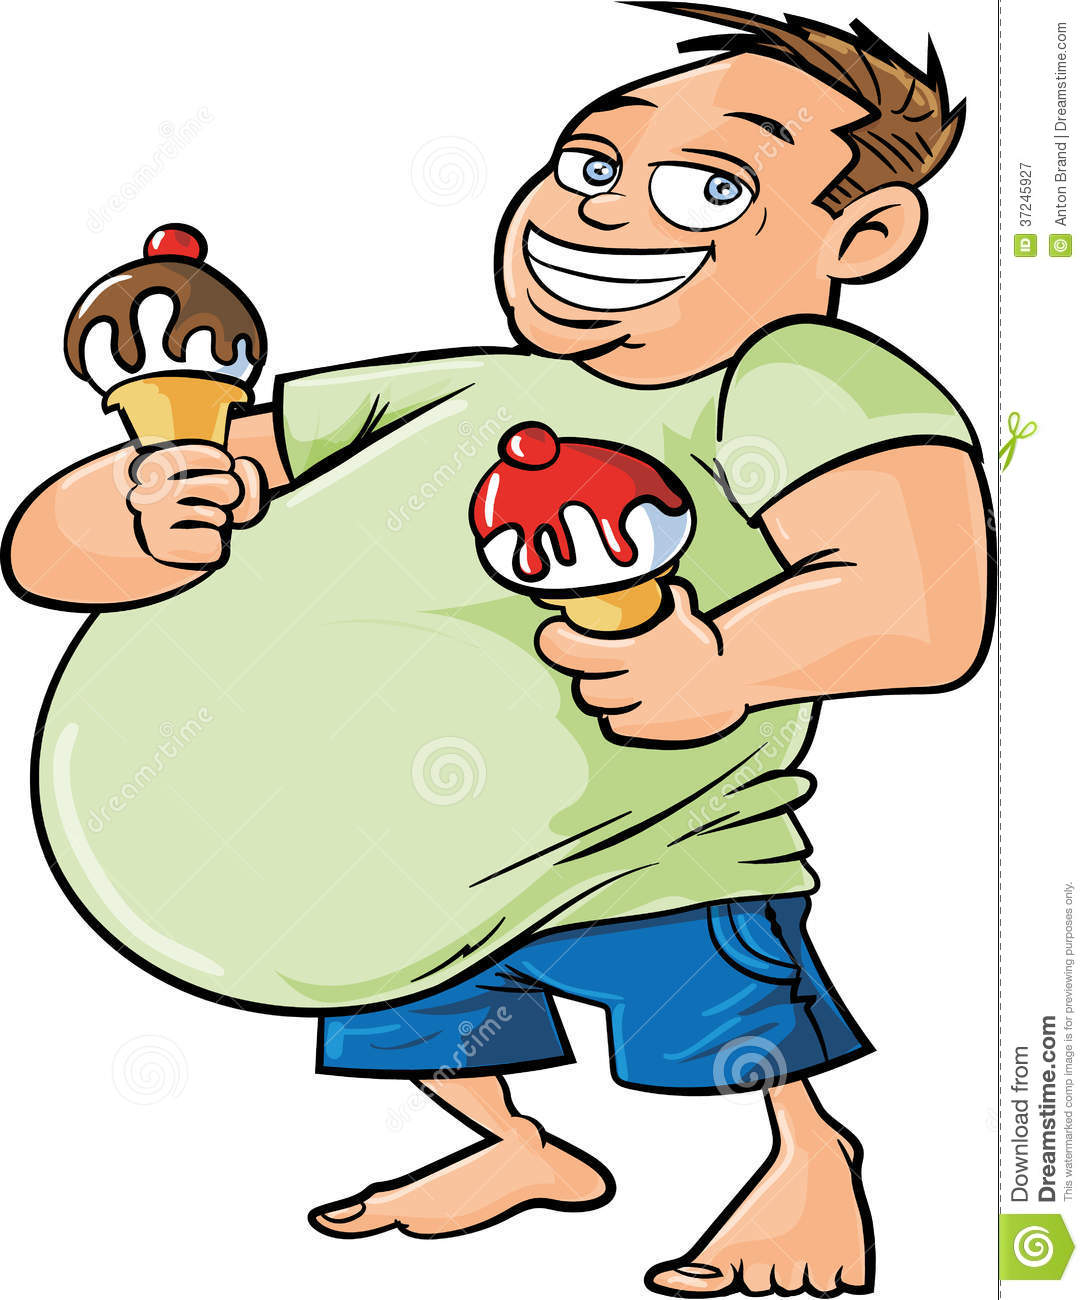 Cartoon Overweight Man Holding Two Ice Creams Royalty Free Stock